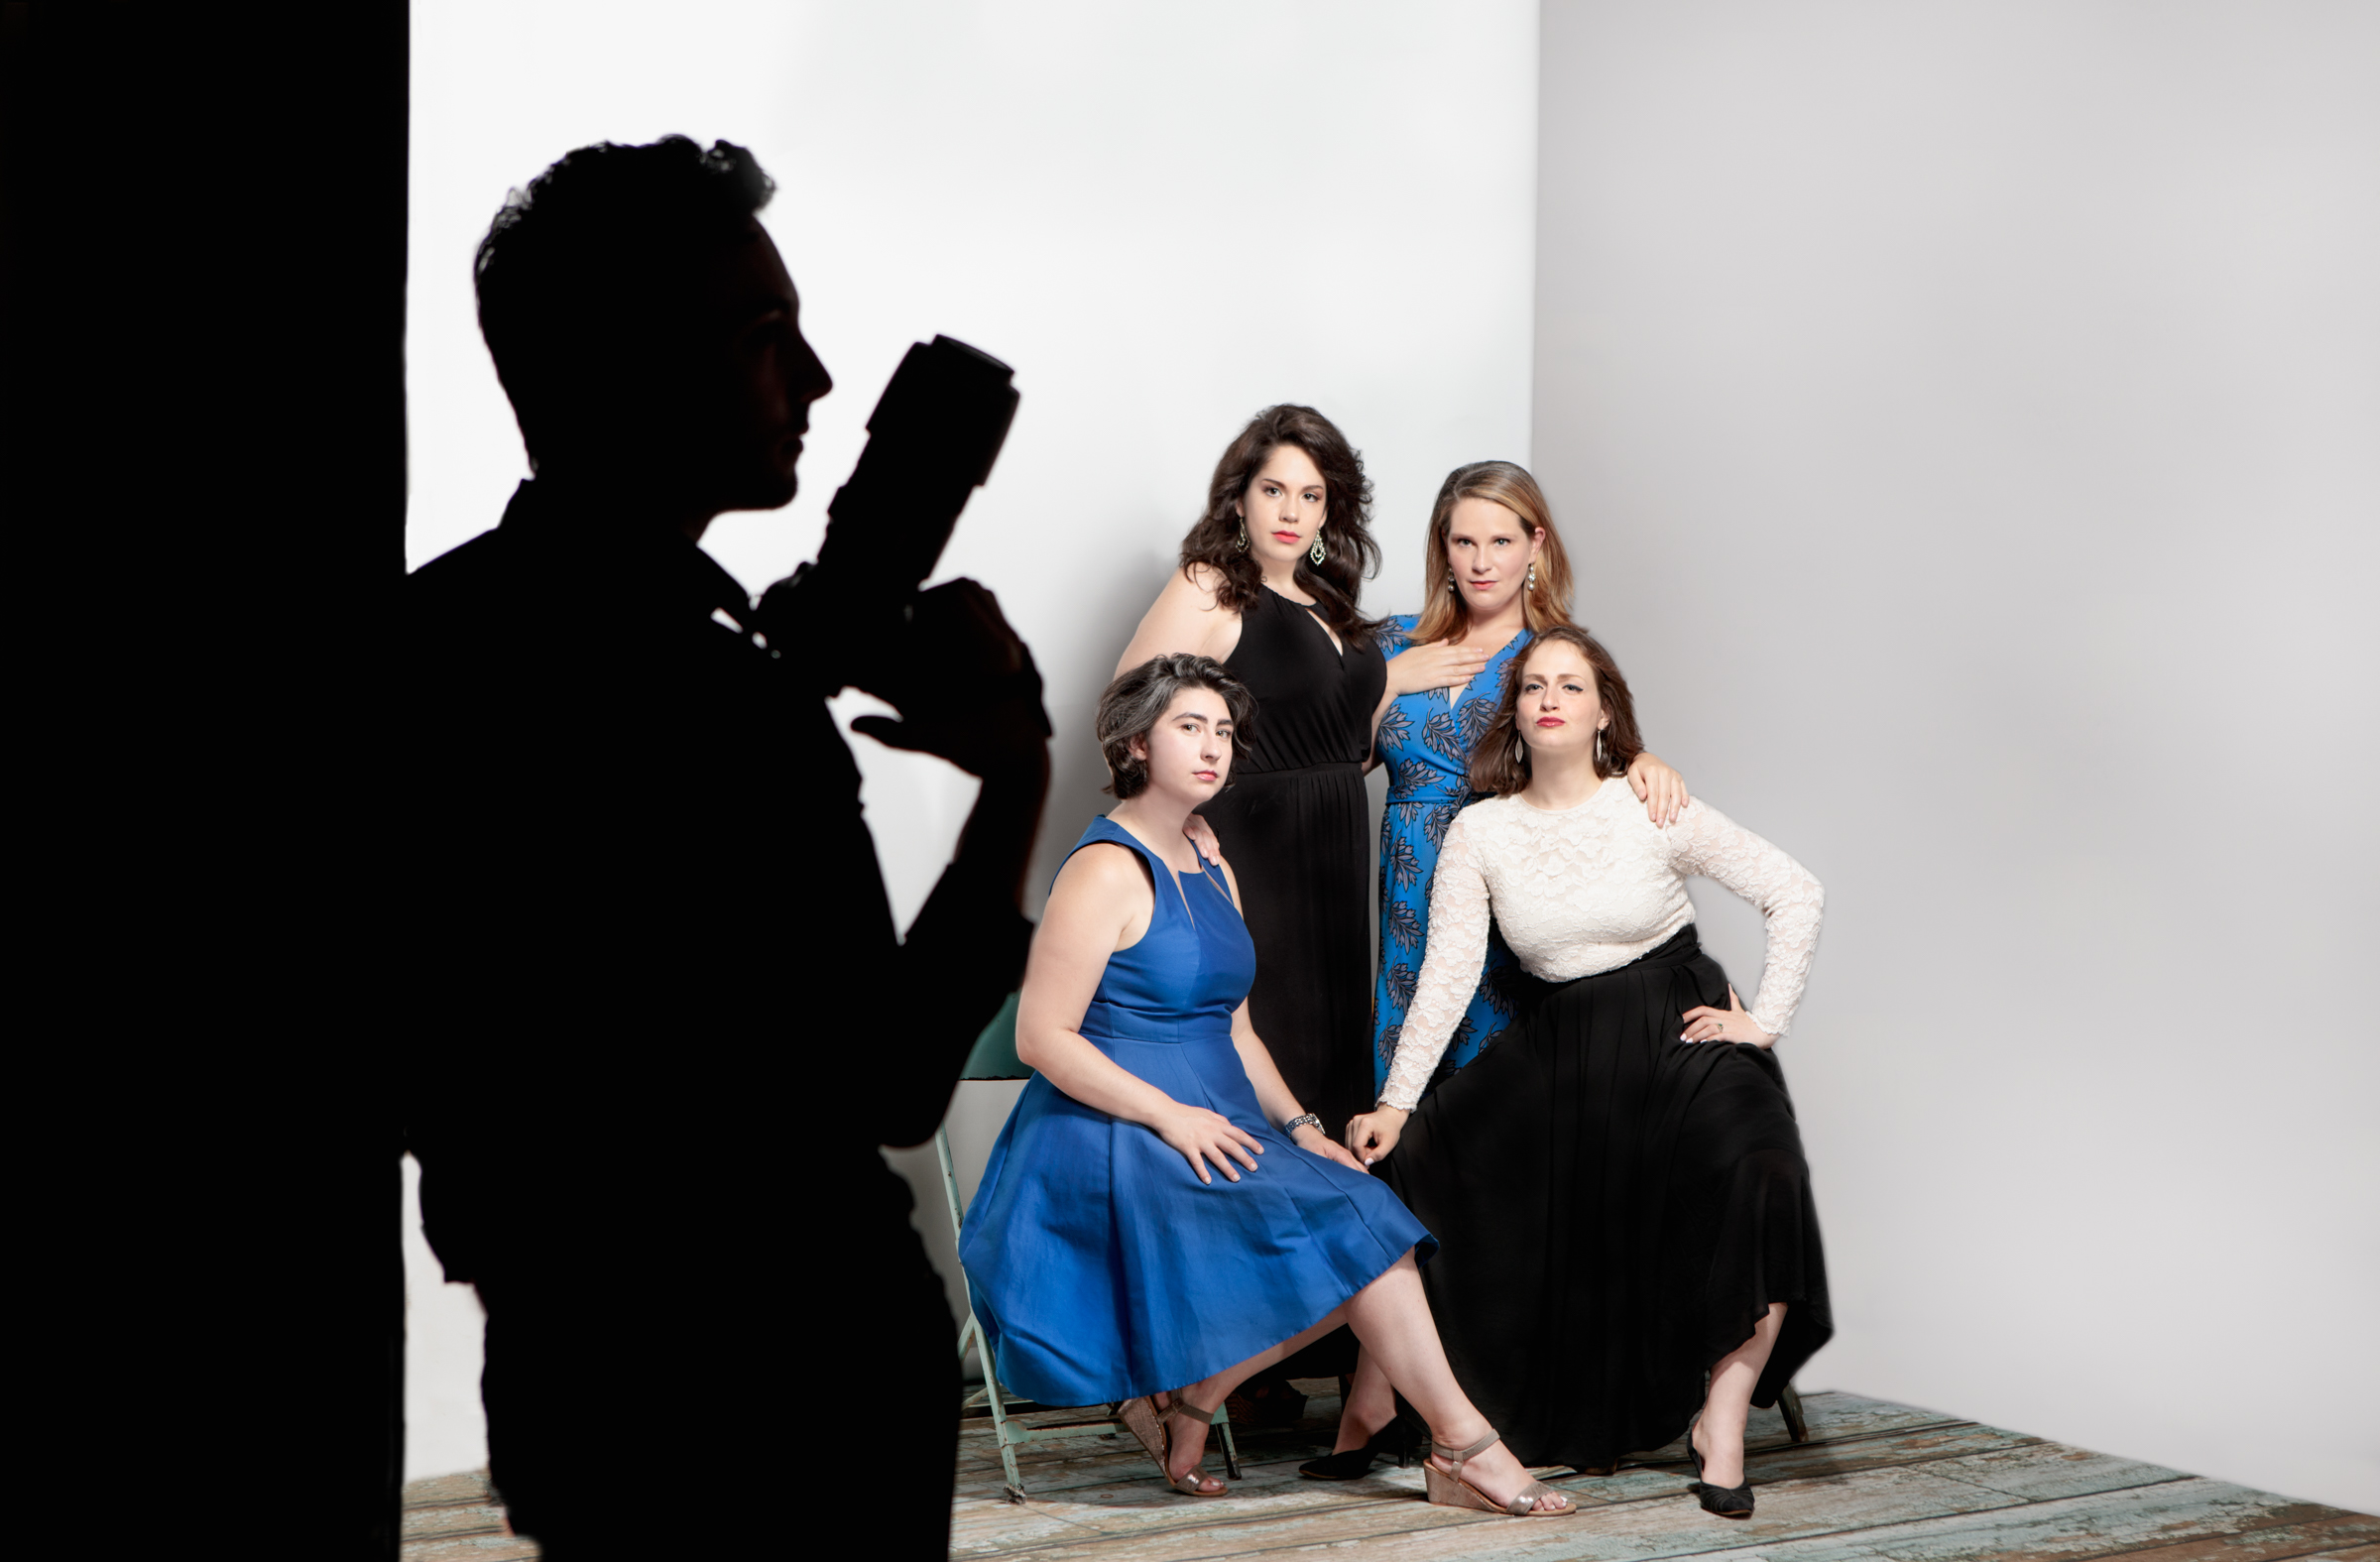  Ann Fogler with the Boston Opera Collaborative Colleagues at  Don Giovanni  marketing photoshoot.   August 2018    Photo credit: Dan Busler  